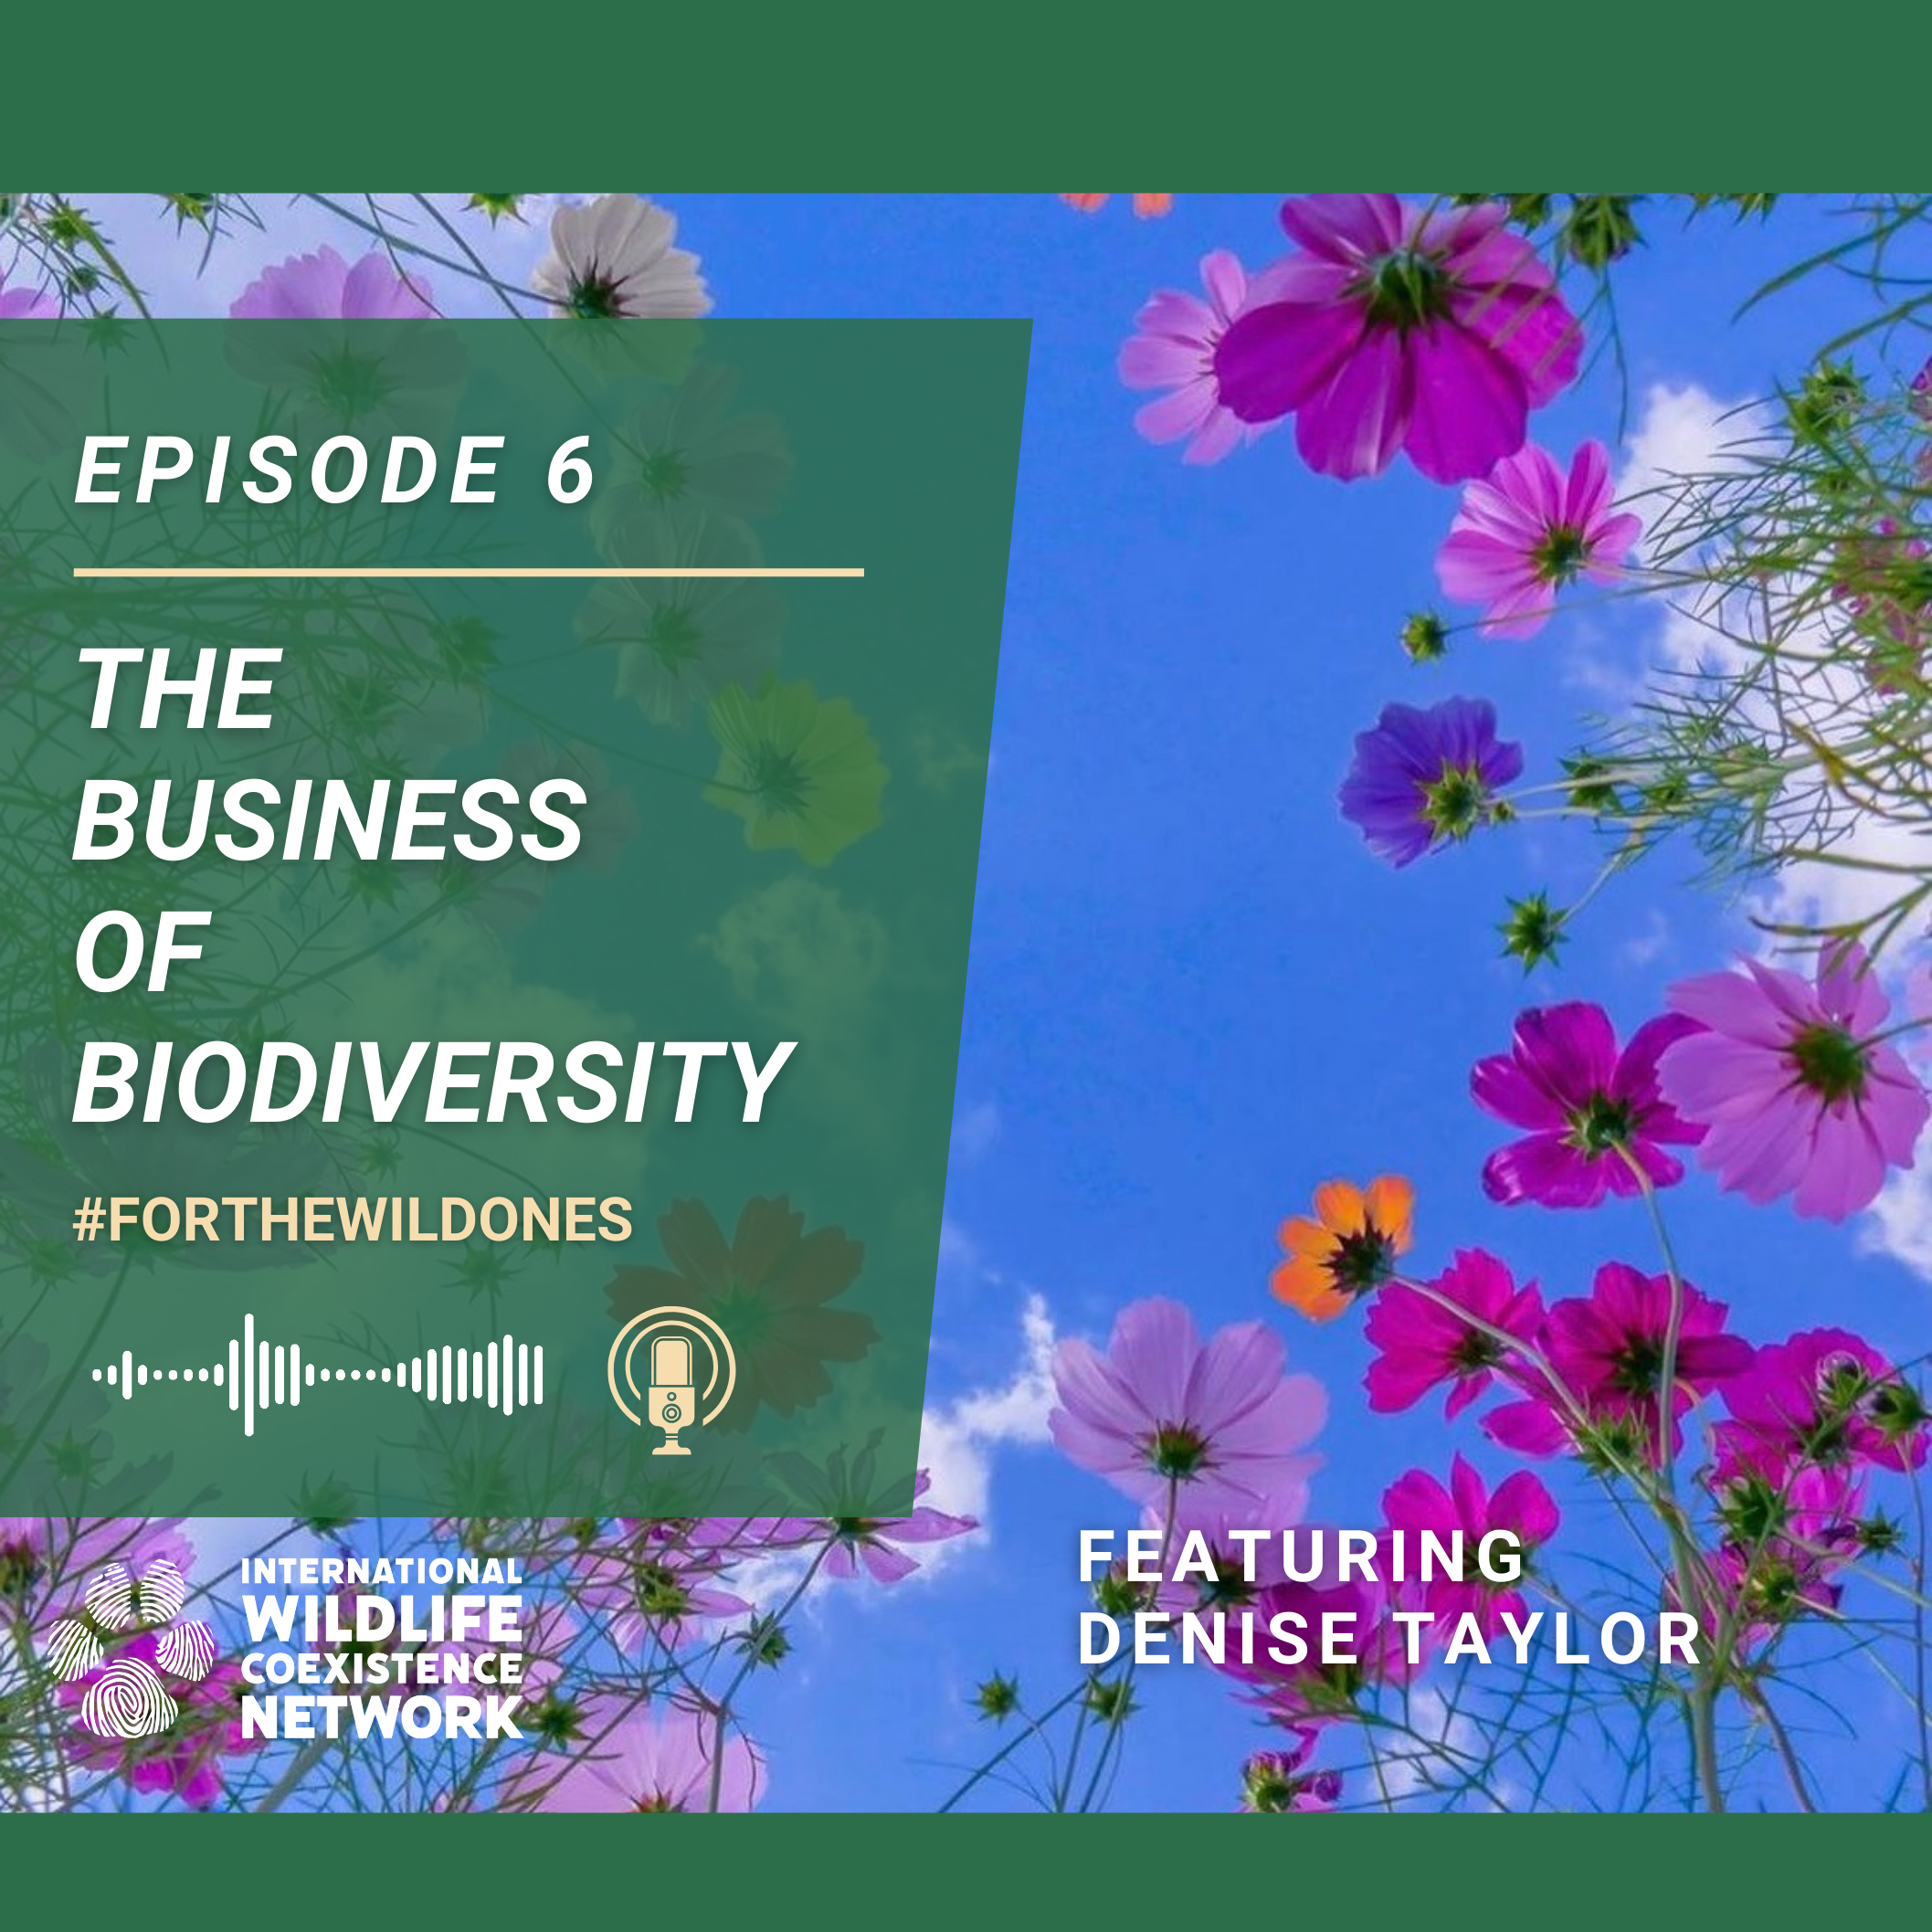 The Business of Biodiversity